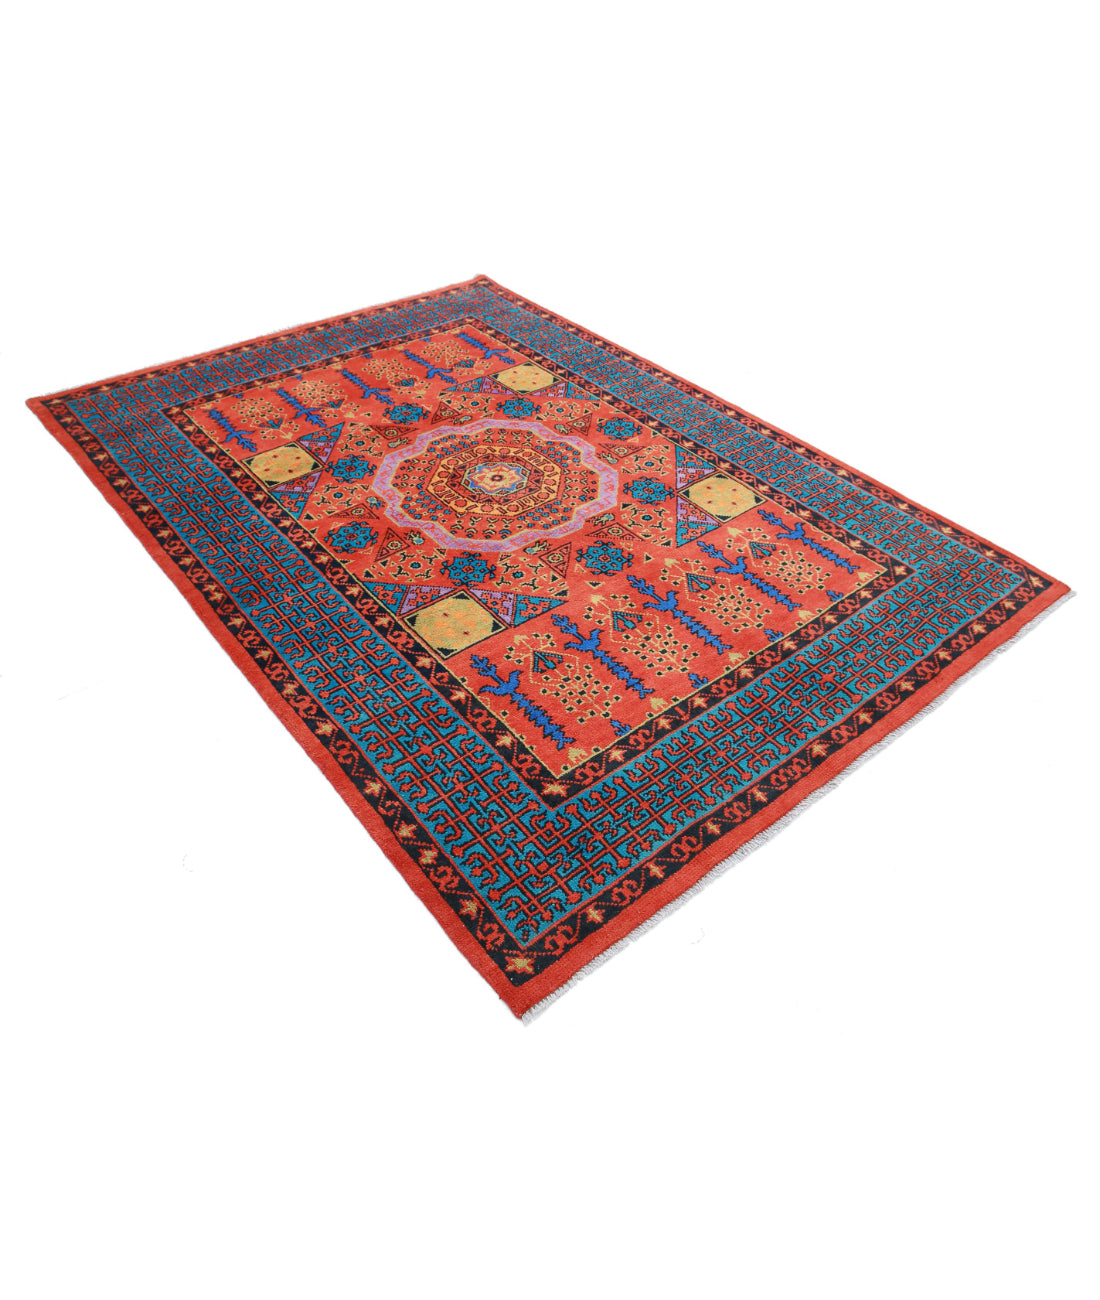 Revival 5'7'' X 7'9'' Hand-Knotted Wool Rug 5'7'' x 7'9'' (168 X 233) / Orange / Blue